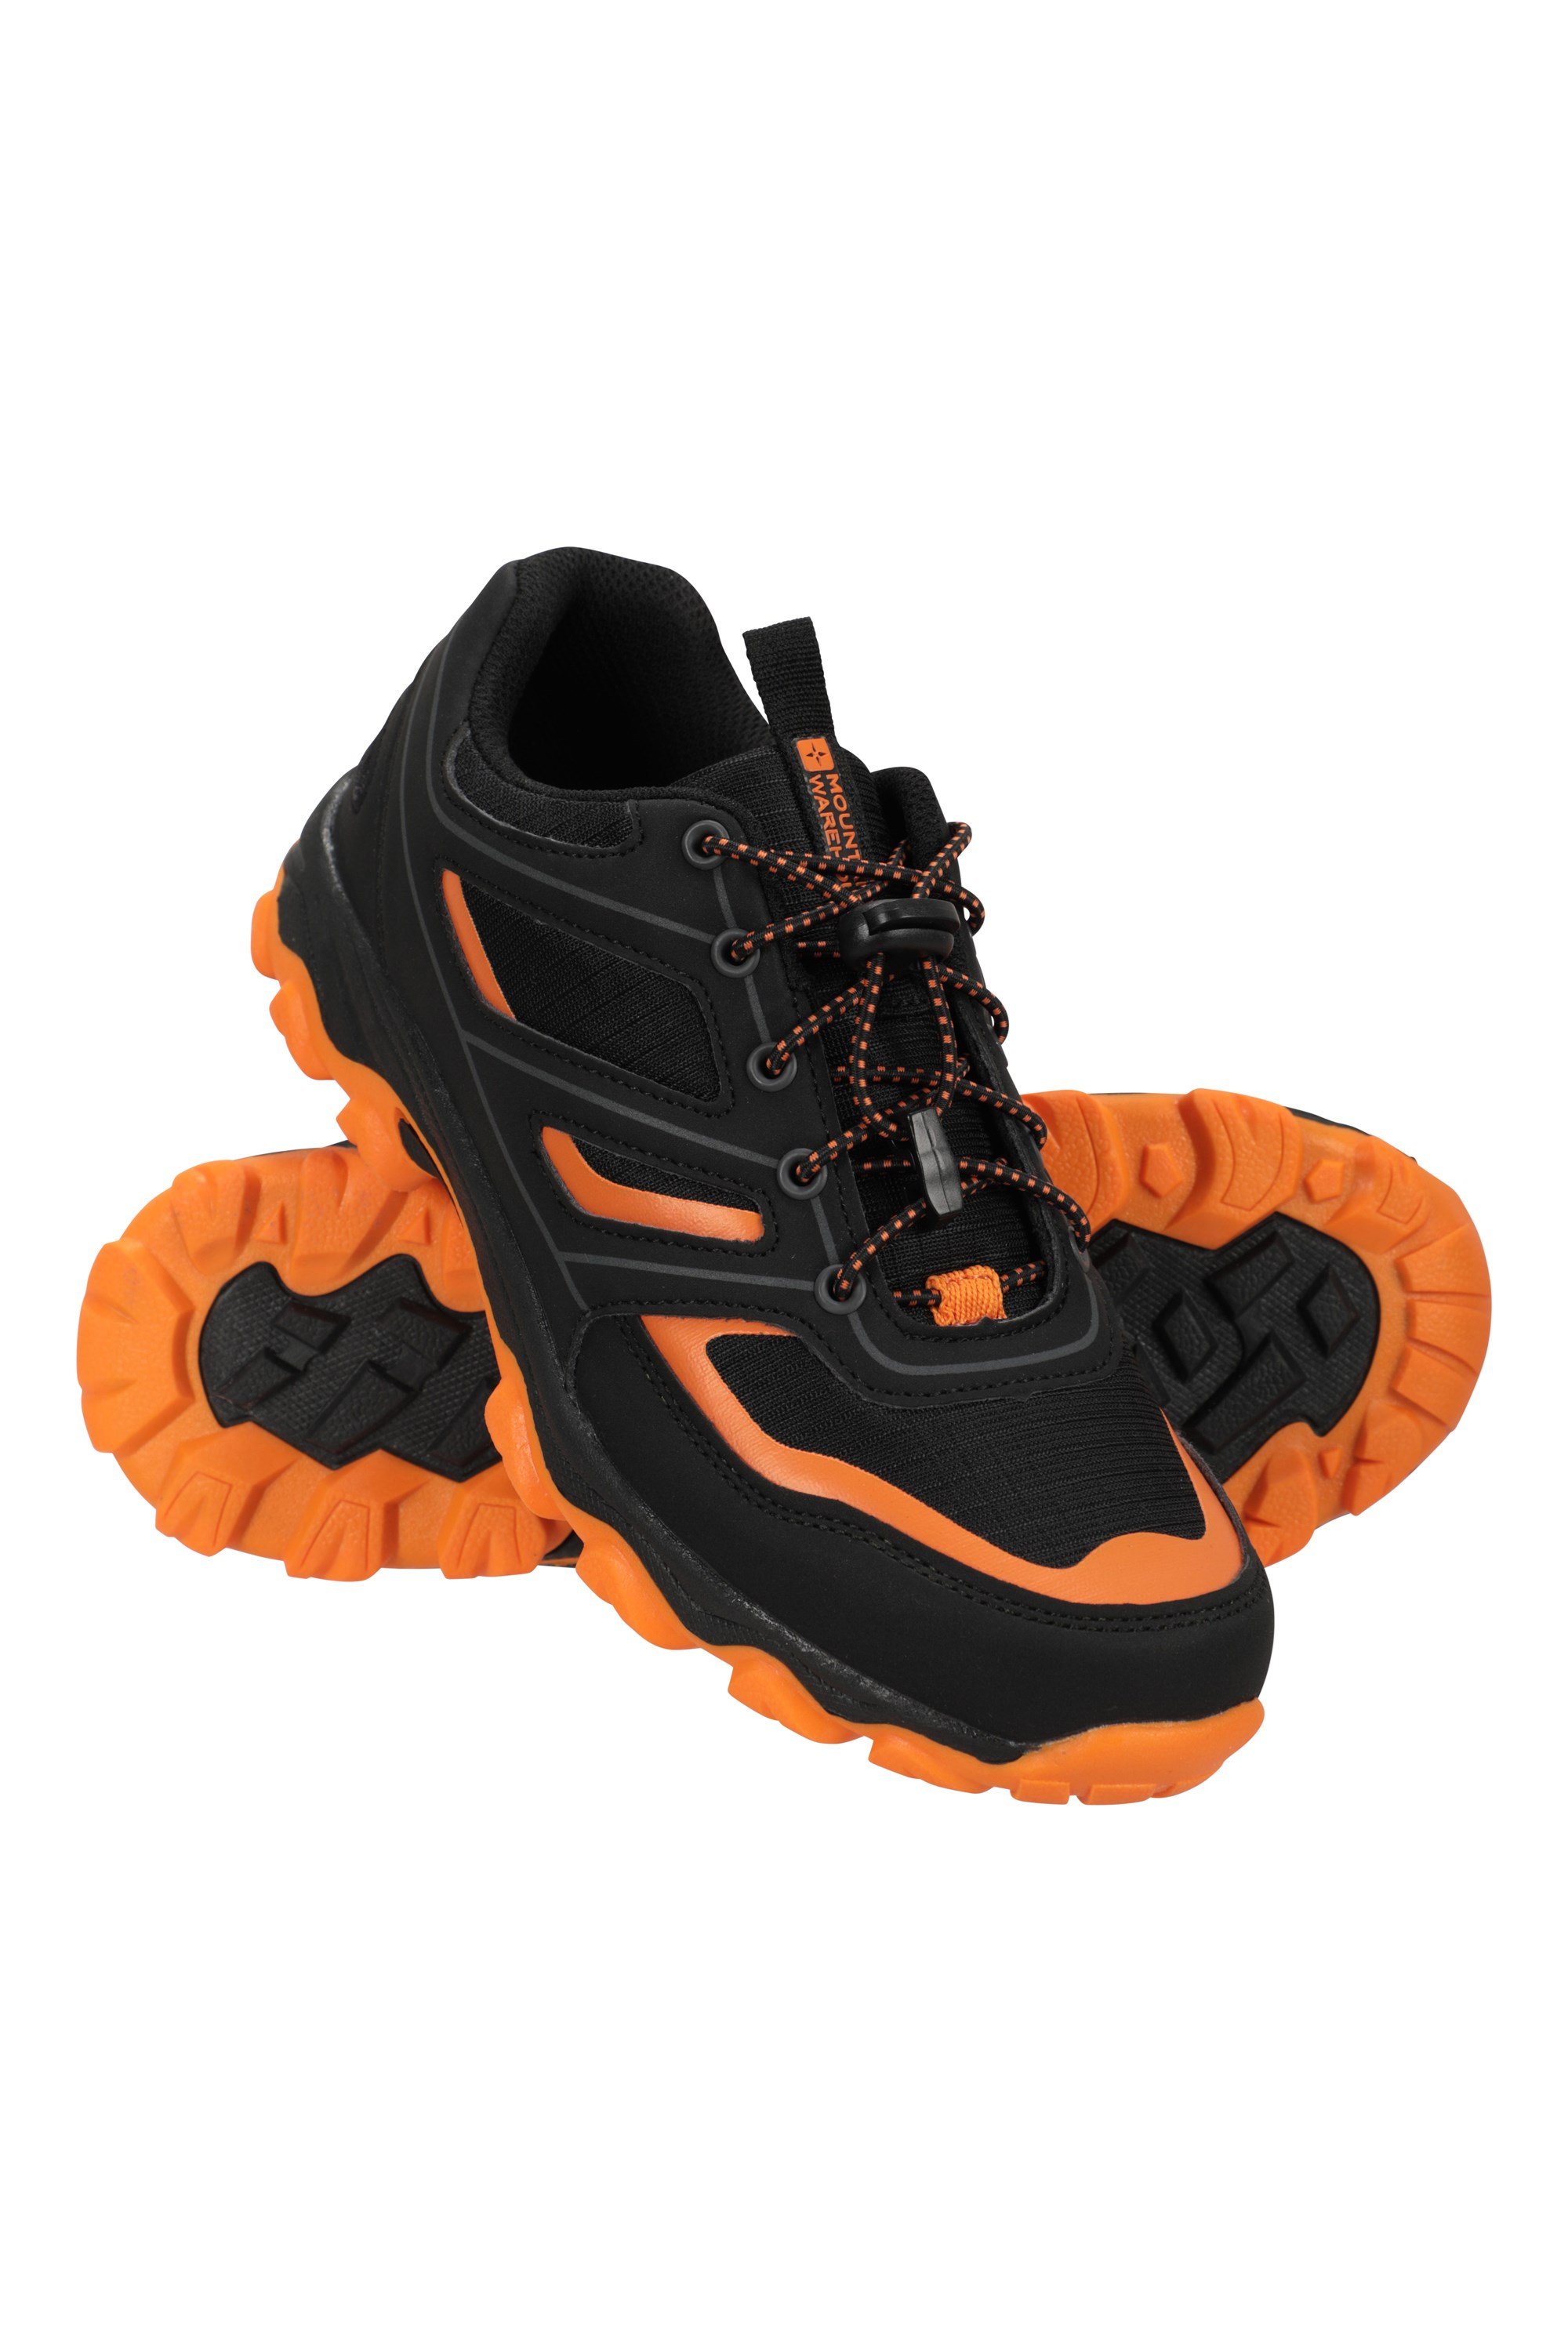 Great for Walking & Hiking Lightweight Durable & Breathable Mountain Warehouse Kids Approach Running Trainers Indoor & Outdoor Sports Shoes for Boys & Girls 